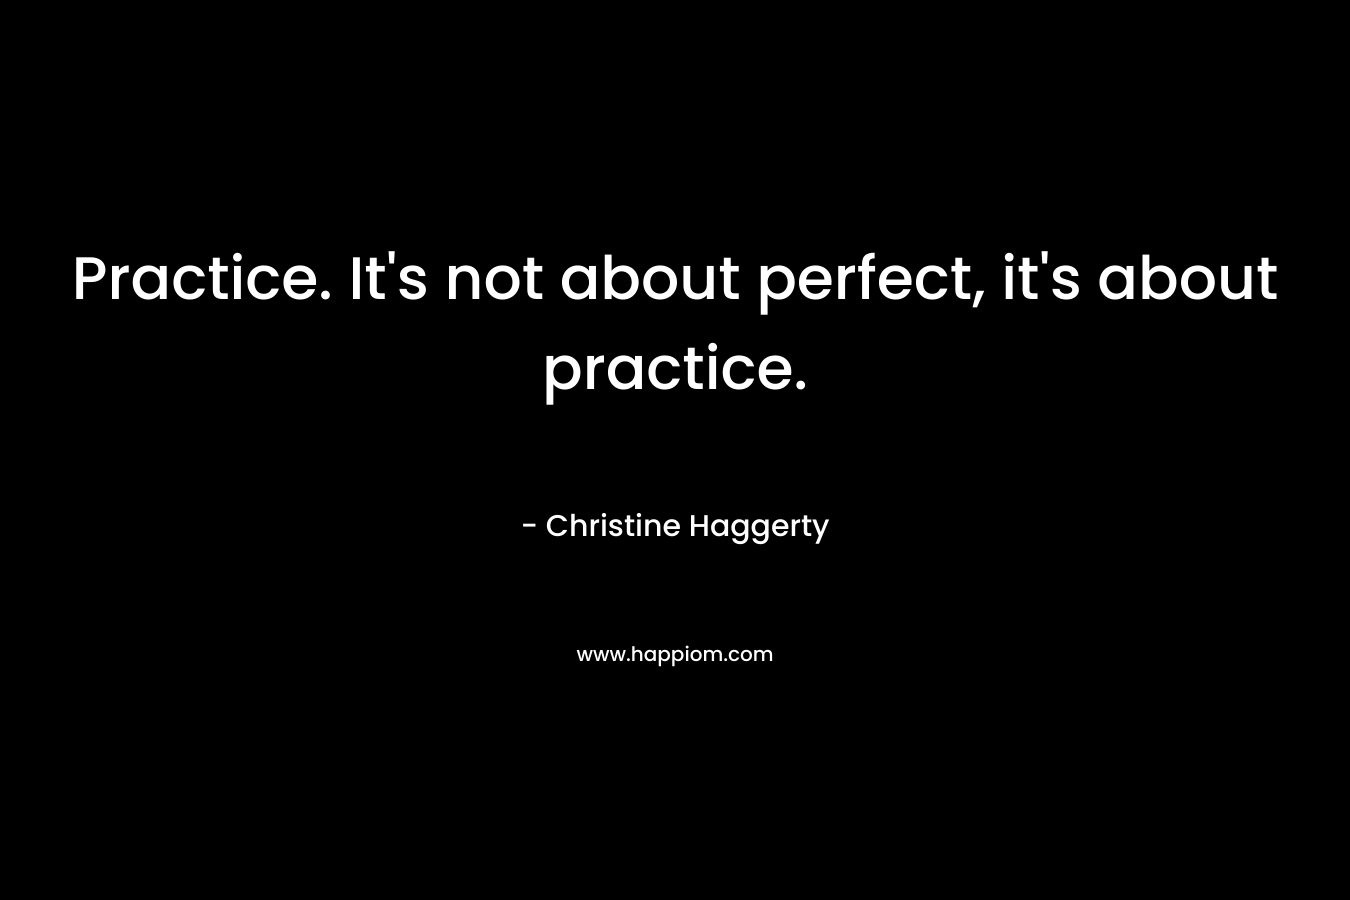 Practice. It's not about perfect, it's about practice.